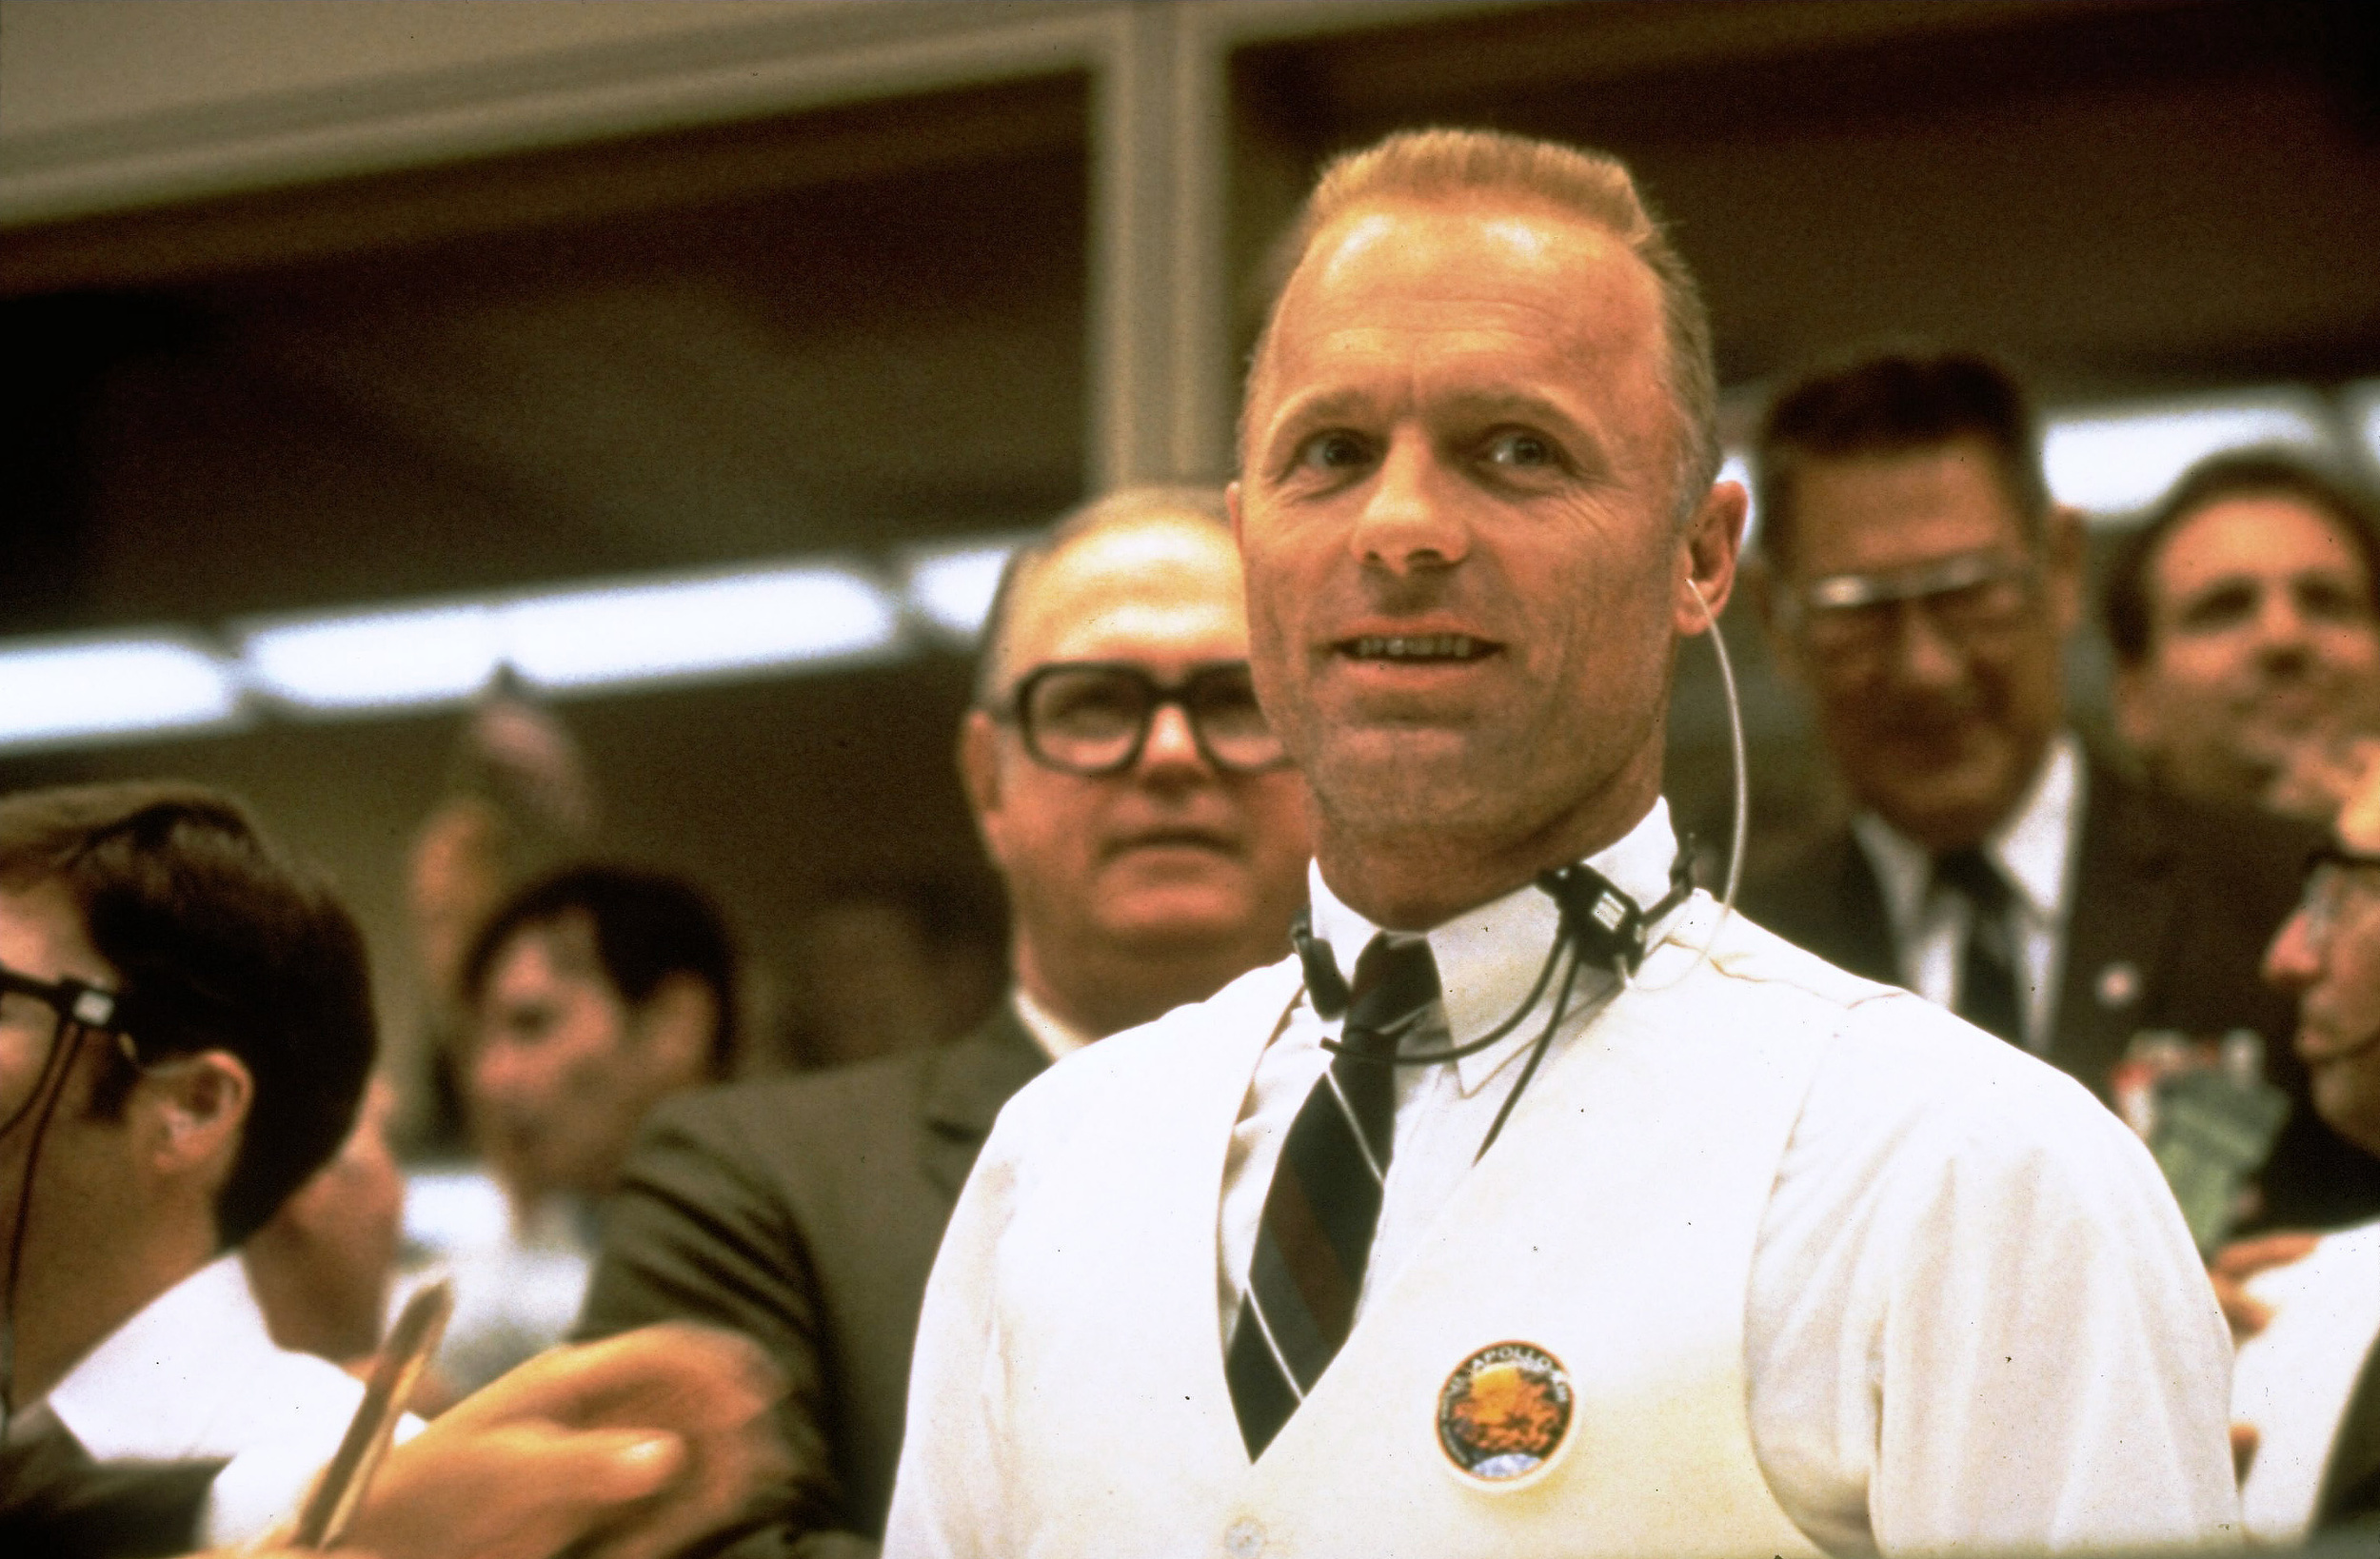 <p>When the Academy Award nominations came out, “Apollo 13” was well represented. It was nominated for nine Oscars, including acting nods for Ed Harris and Kathleen Quinlan. What was notable, though, is the fact “Apollo 13” was nominated for Best Picture, but Howard did not get a nomination for Best Director.</p><p>You may also like: <a href='https://www.yardbarker.com/entertainment/articles/20th_century_sitcoms_that_are_still_in_our_regular_rotation/s1__39345263'>20th-century sitcoms that are still in our regular rotation</a></p>